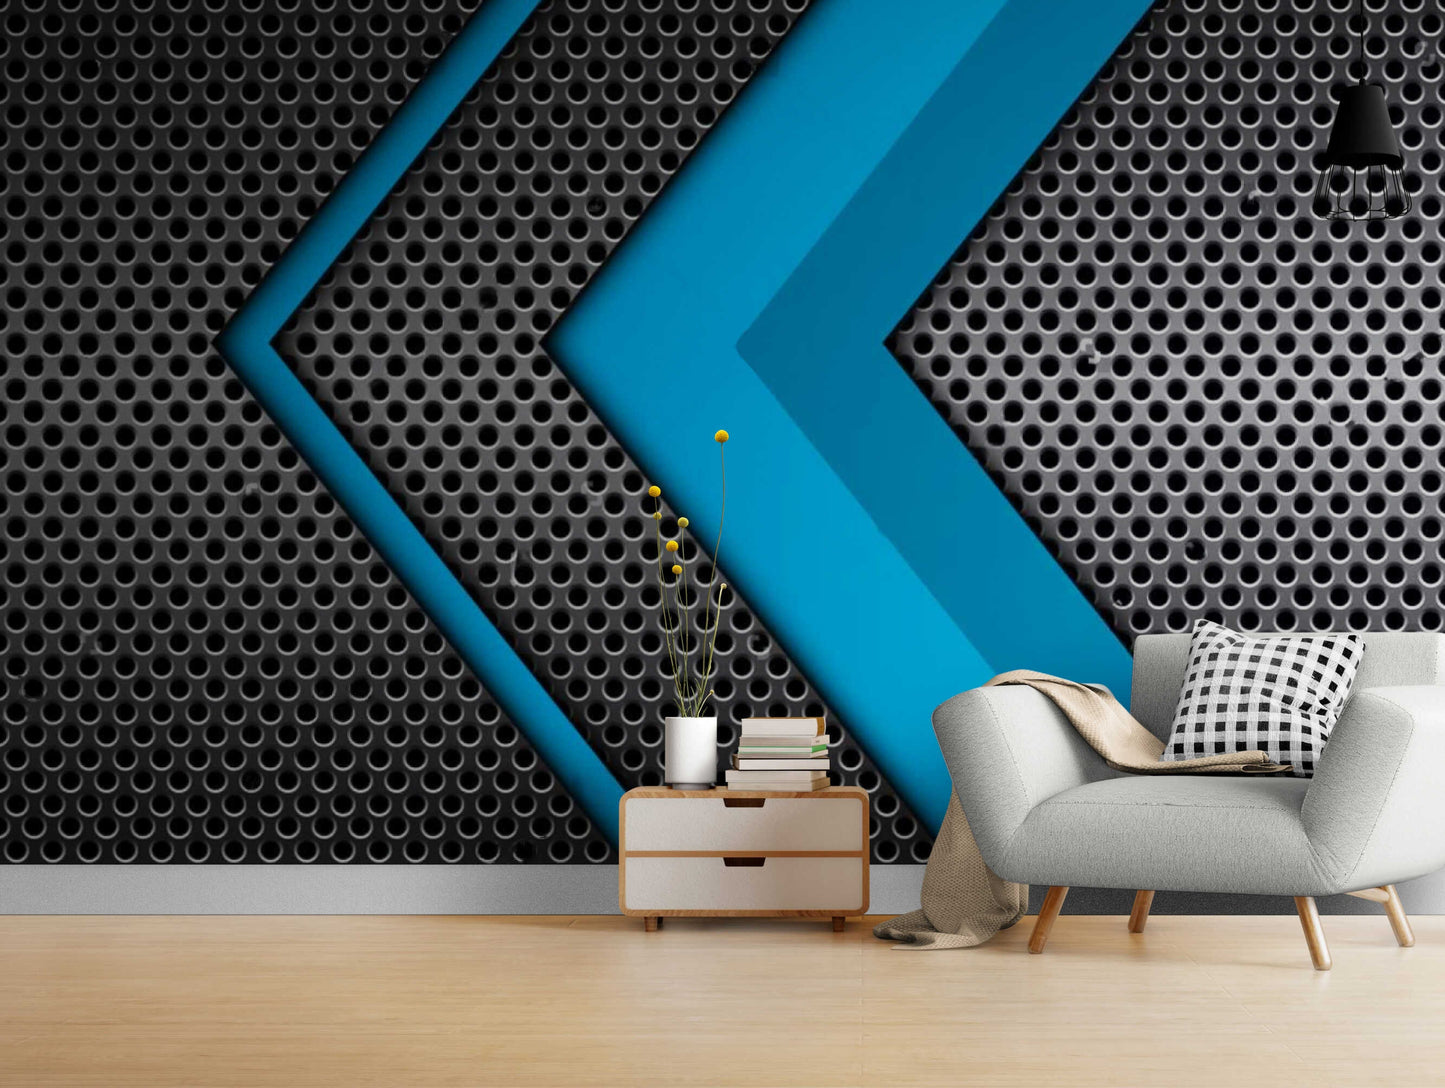 Industrial-inspired wall decor with a bold blue accent wall design, adding depth and dimension to your space.